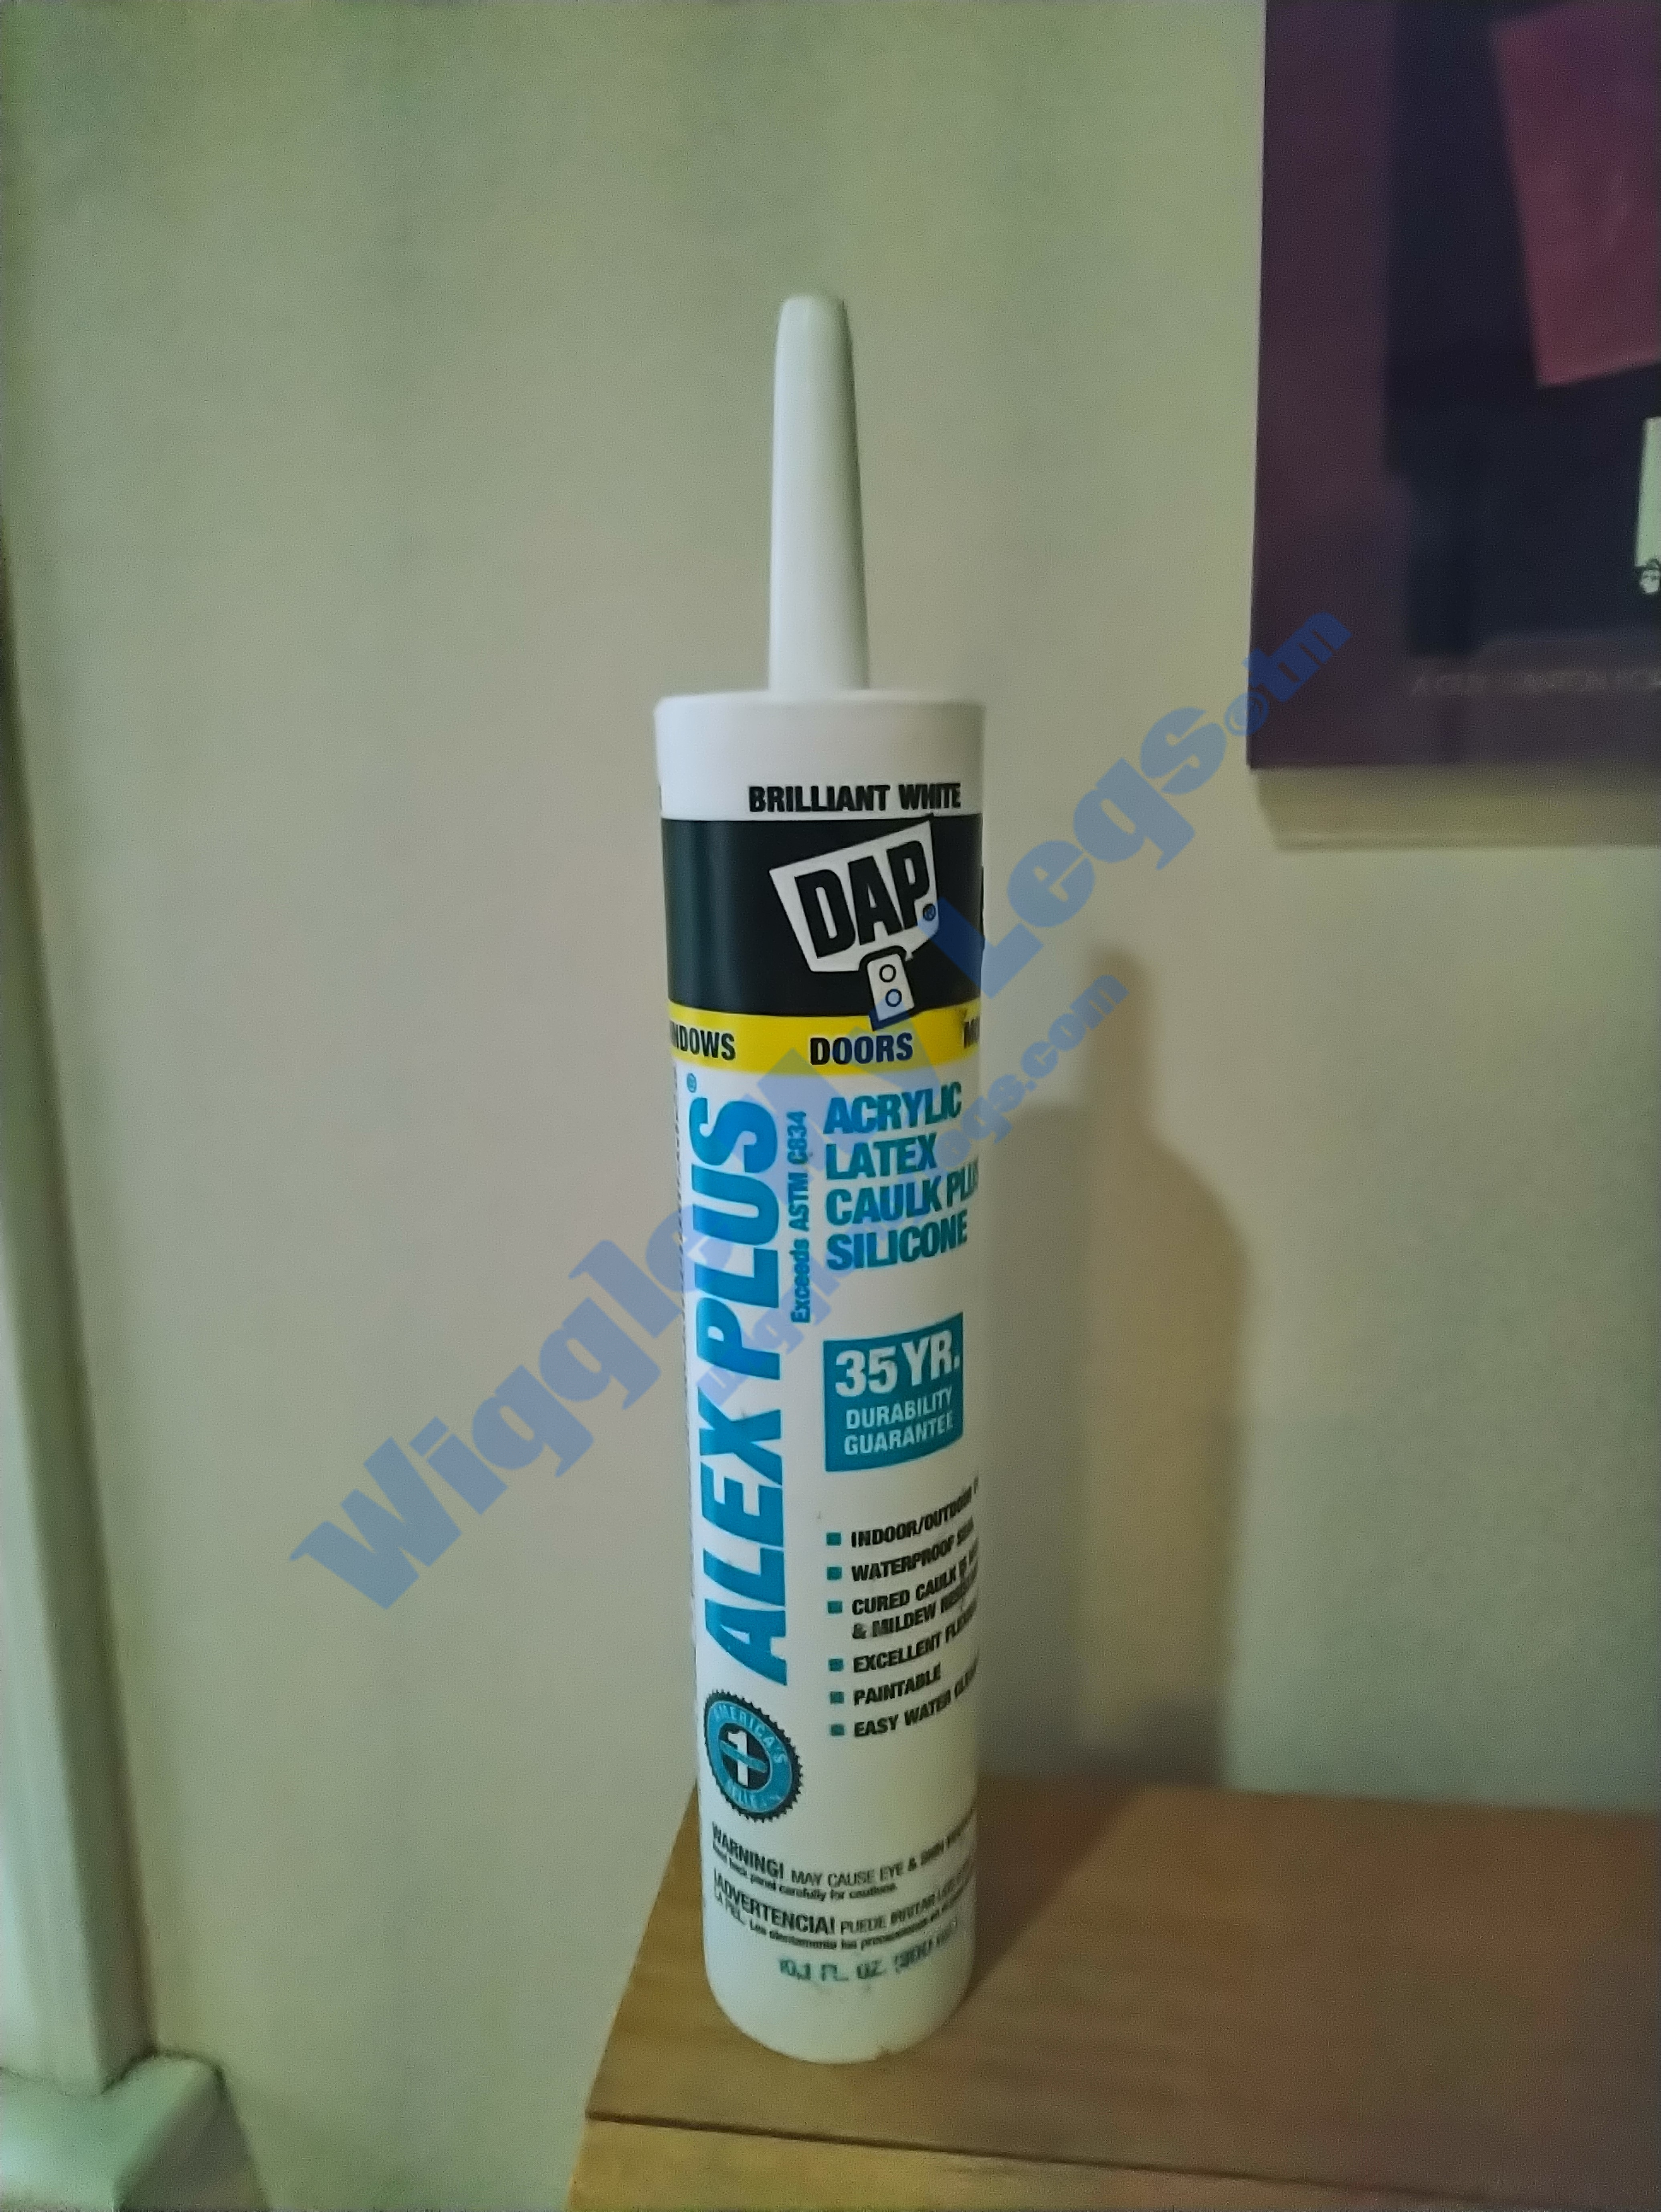 Picture of a tube of the DAP caulk used for this job.